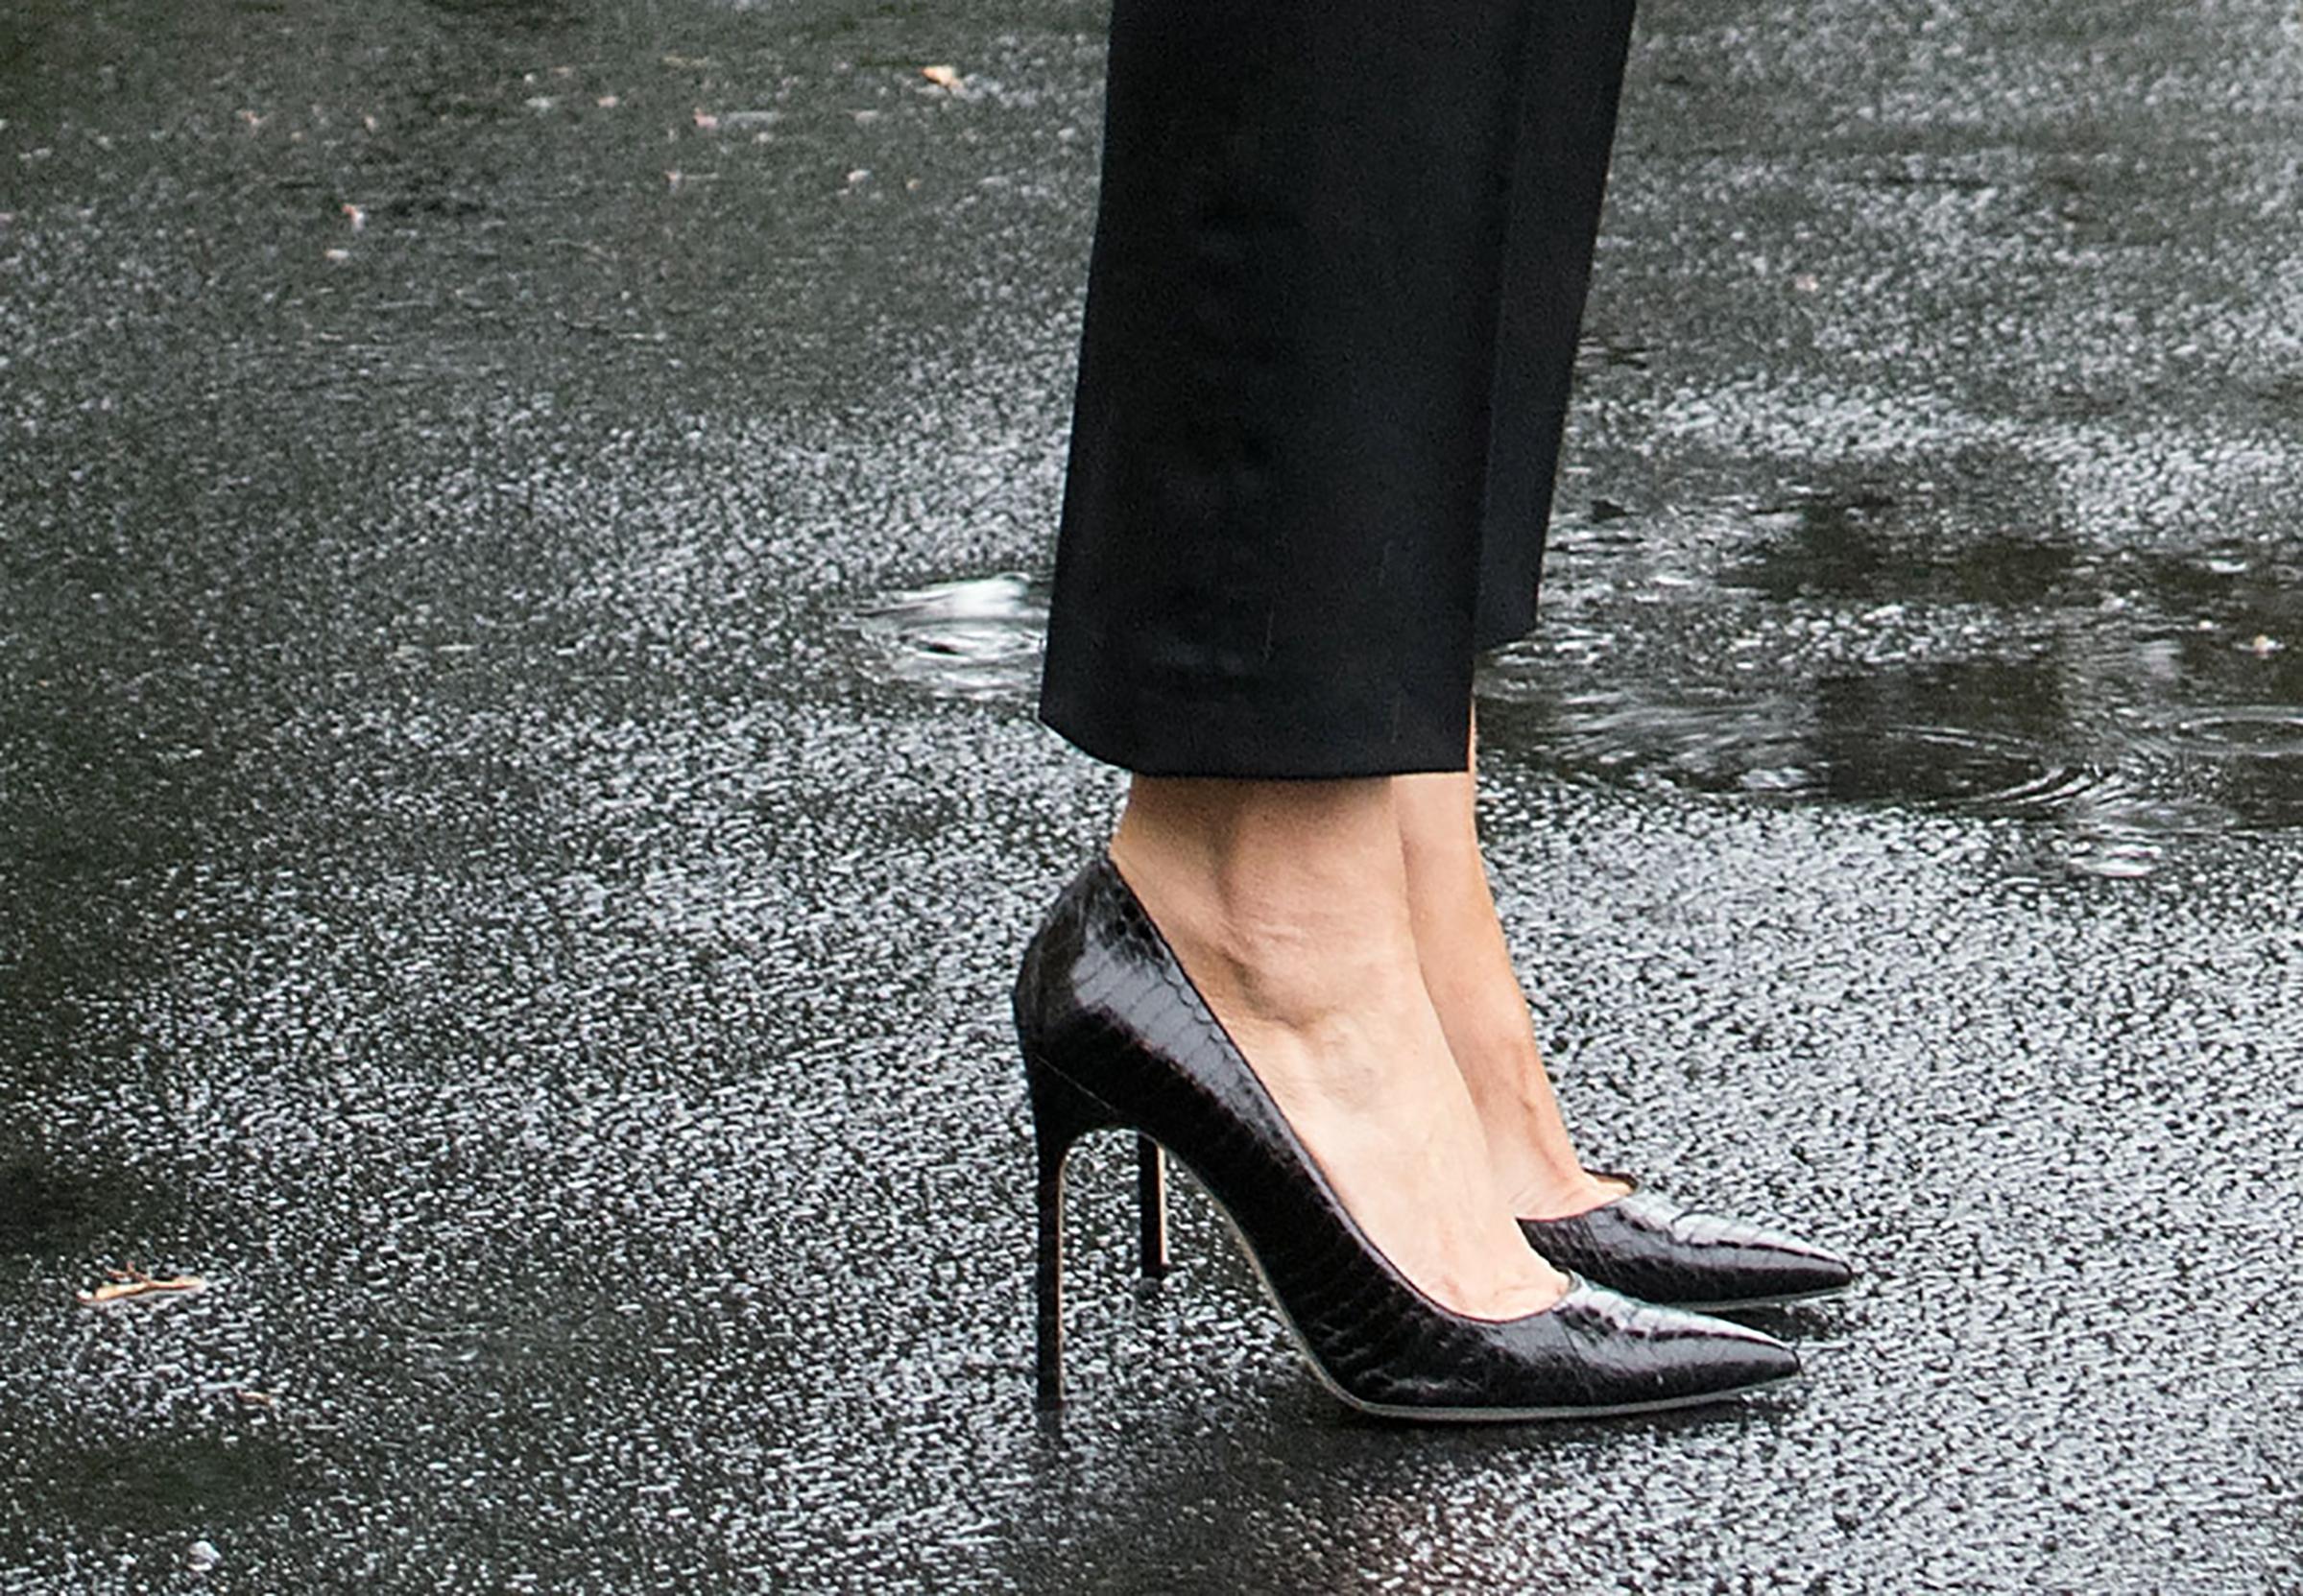 First lady Melania Trump wearing black Manolo Blahnik stilettos before leaving for Texas to observe the Hurricane Harvey relief efforts, Aug.29, 2017.